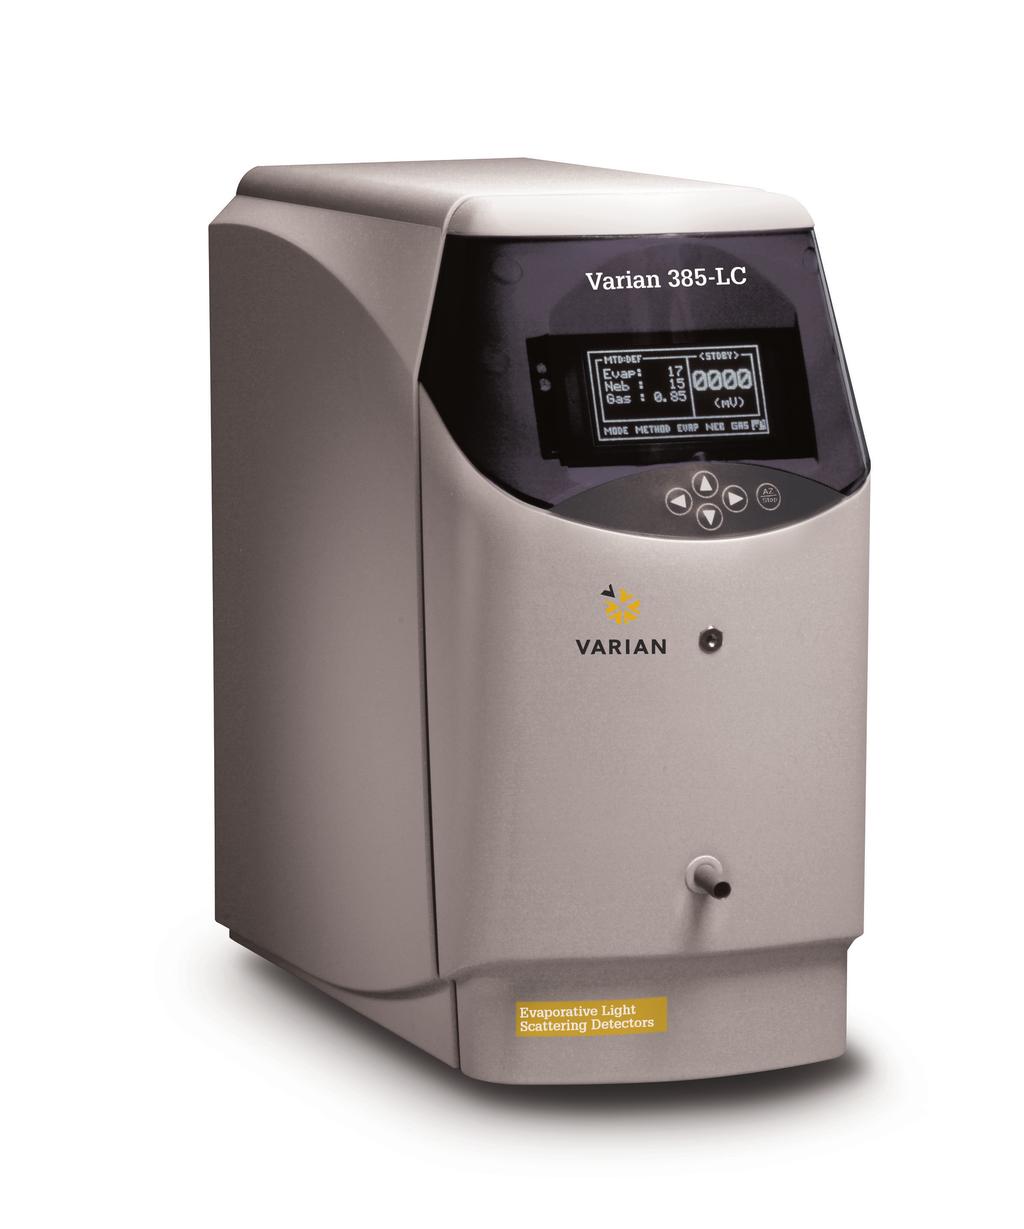 D ATA S H E E T Varian 8-LC EVAPORATIVE LIGHT SCATTERING DETECTOR ELSD for Low Molecular Weight Compounds Evaporative light scattering detectors are ideal for detecting analytes with no UV